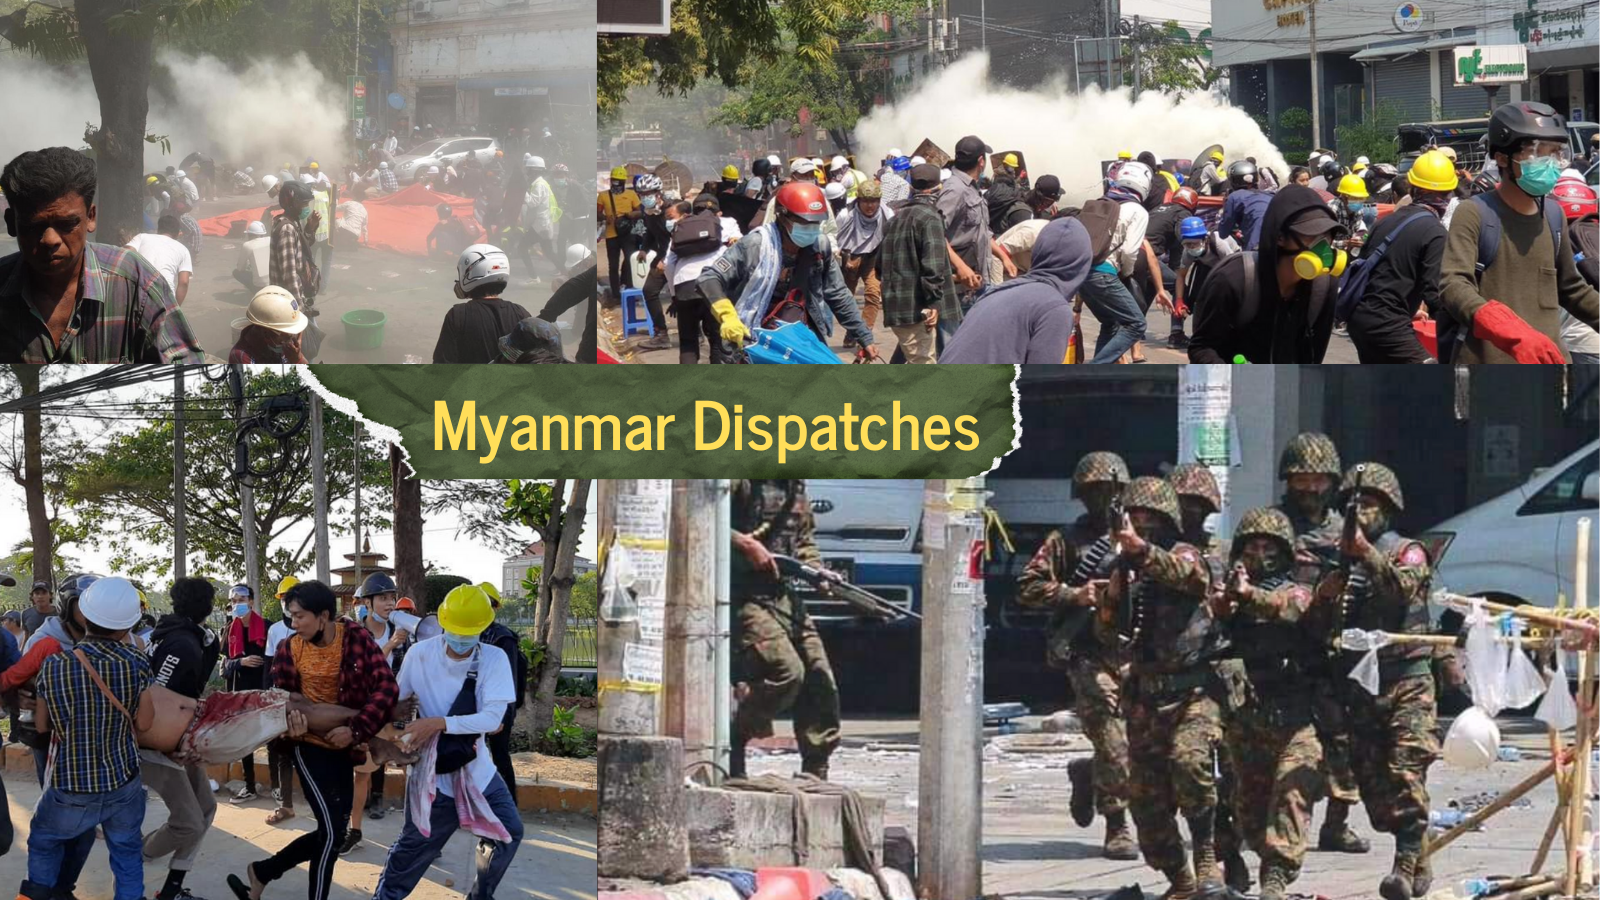 Myanmar dispatches: &#8216;We are the City Underground Team for PDF and my specialty is to handle explosive devices&#8217;